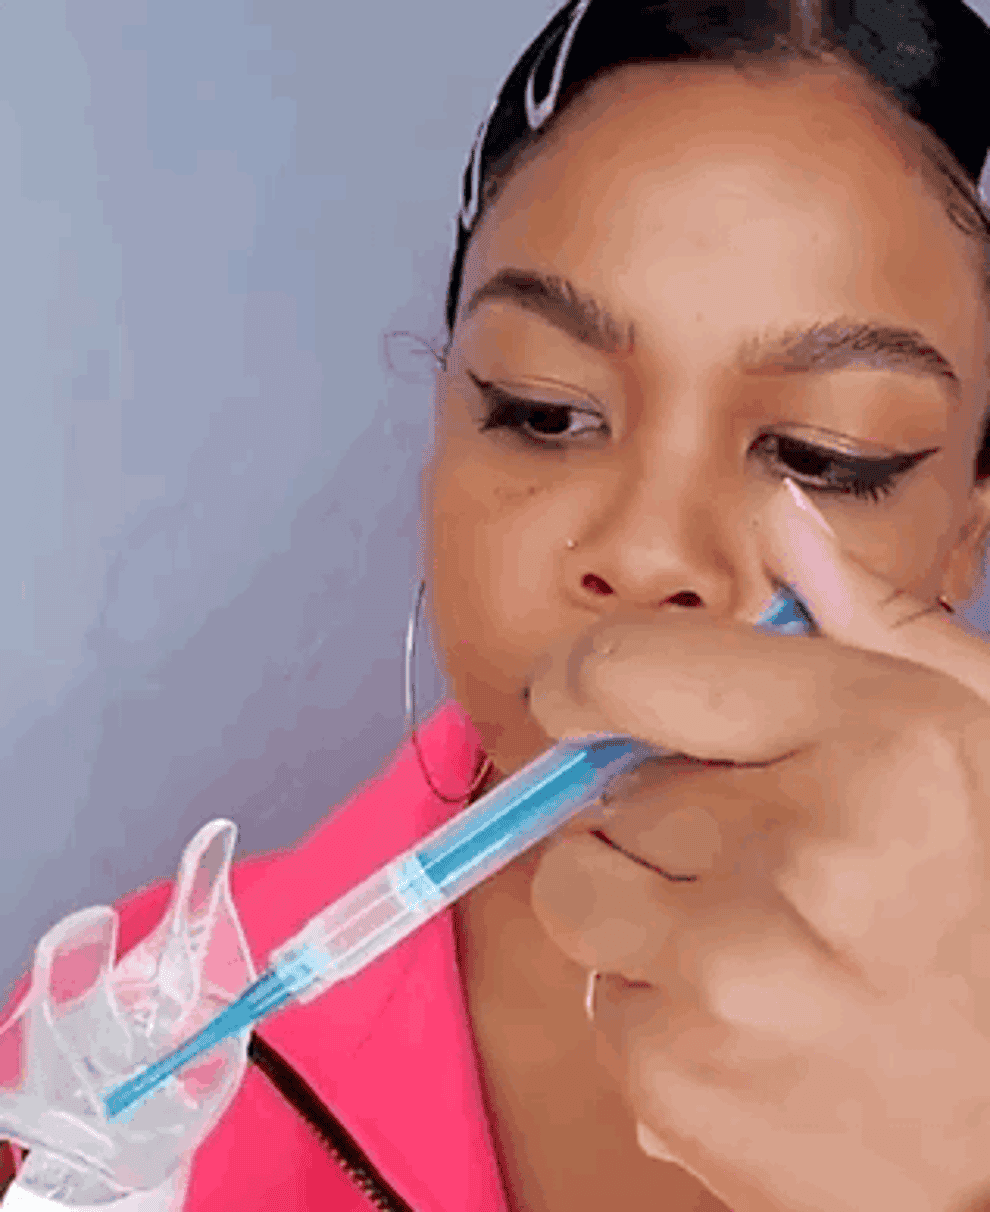 Someone demonstrating how to use the whitening kit in a gif by squeezing paste into the receptacle then putting it in their mouth and indiciating 10 minutes